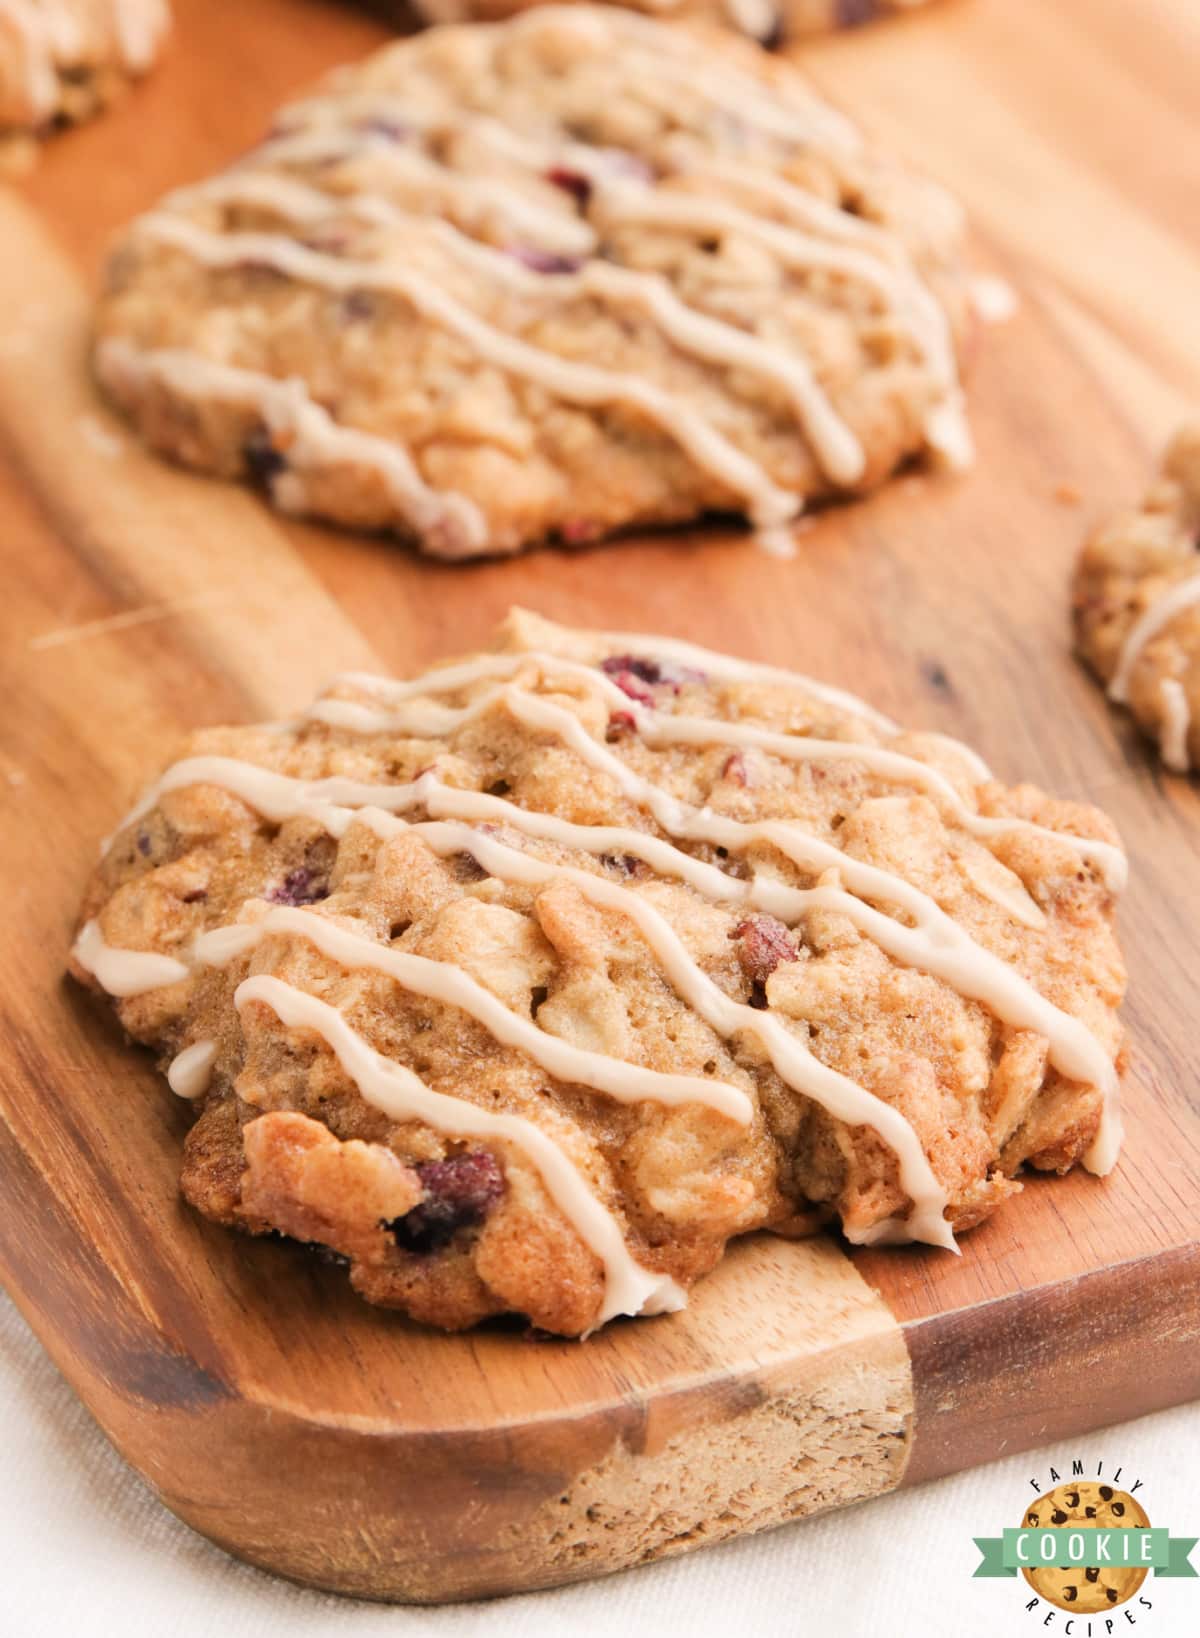 Glazed Pomegranate Oatmeal Cookies are soft, chewy and packed with the flavor of maple syrup, cinnamon, pomegranate seeds and pecans. Delicious oatmeal cookies topped with a simple maple syrup glaze. 